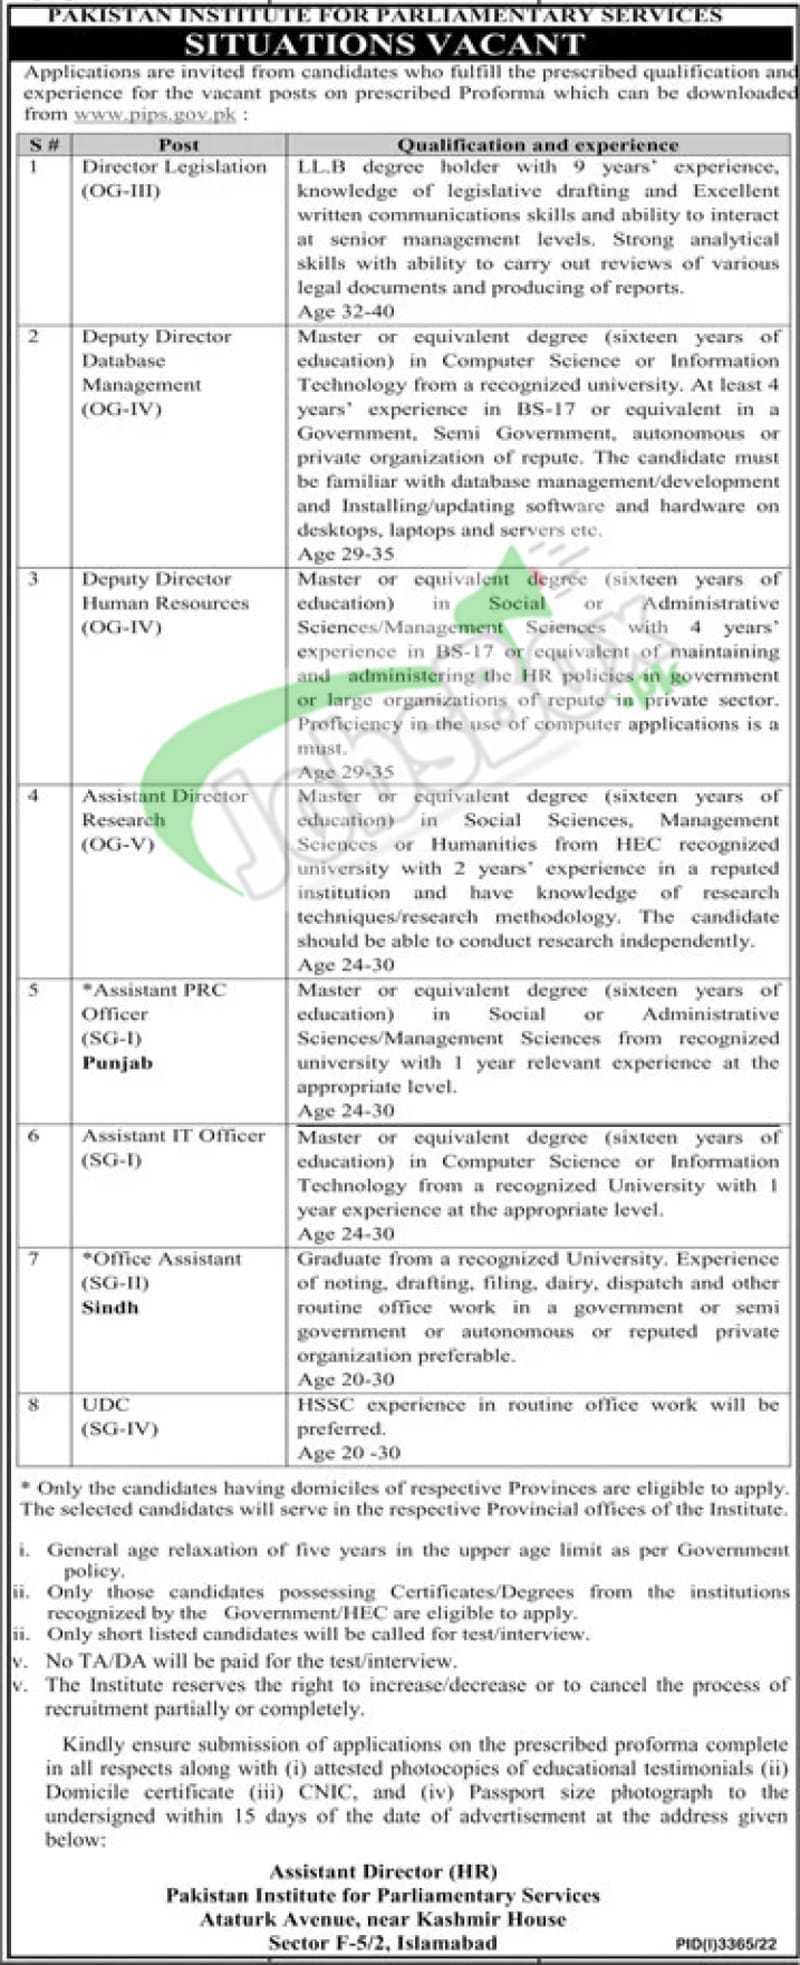 New Govt Jobs at Pakistan Institute of Parliamentary Affairs PIPS